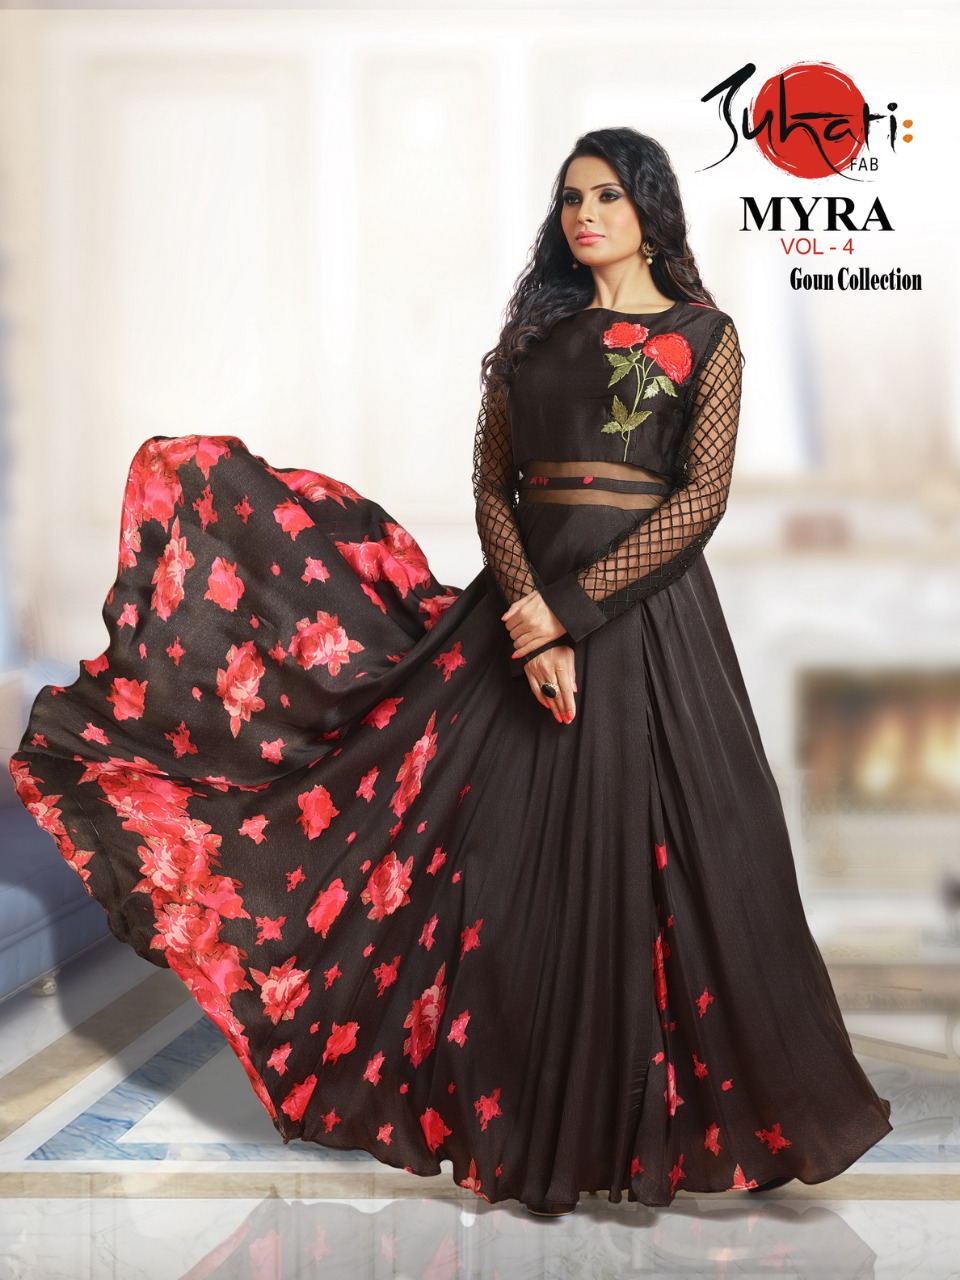 Suhati fab mayra vol 4 Free size gown collection wholesaler